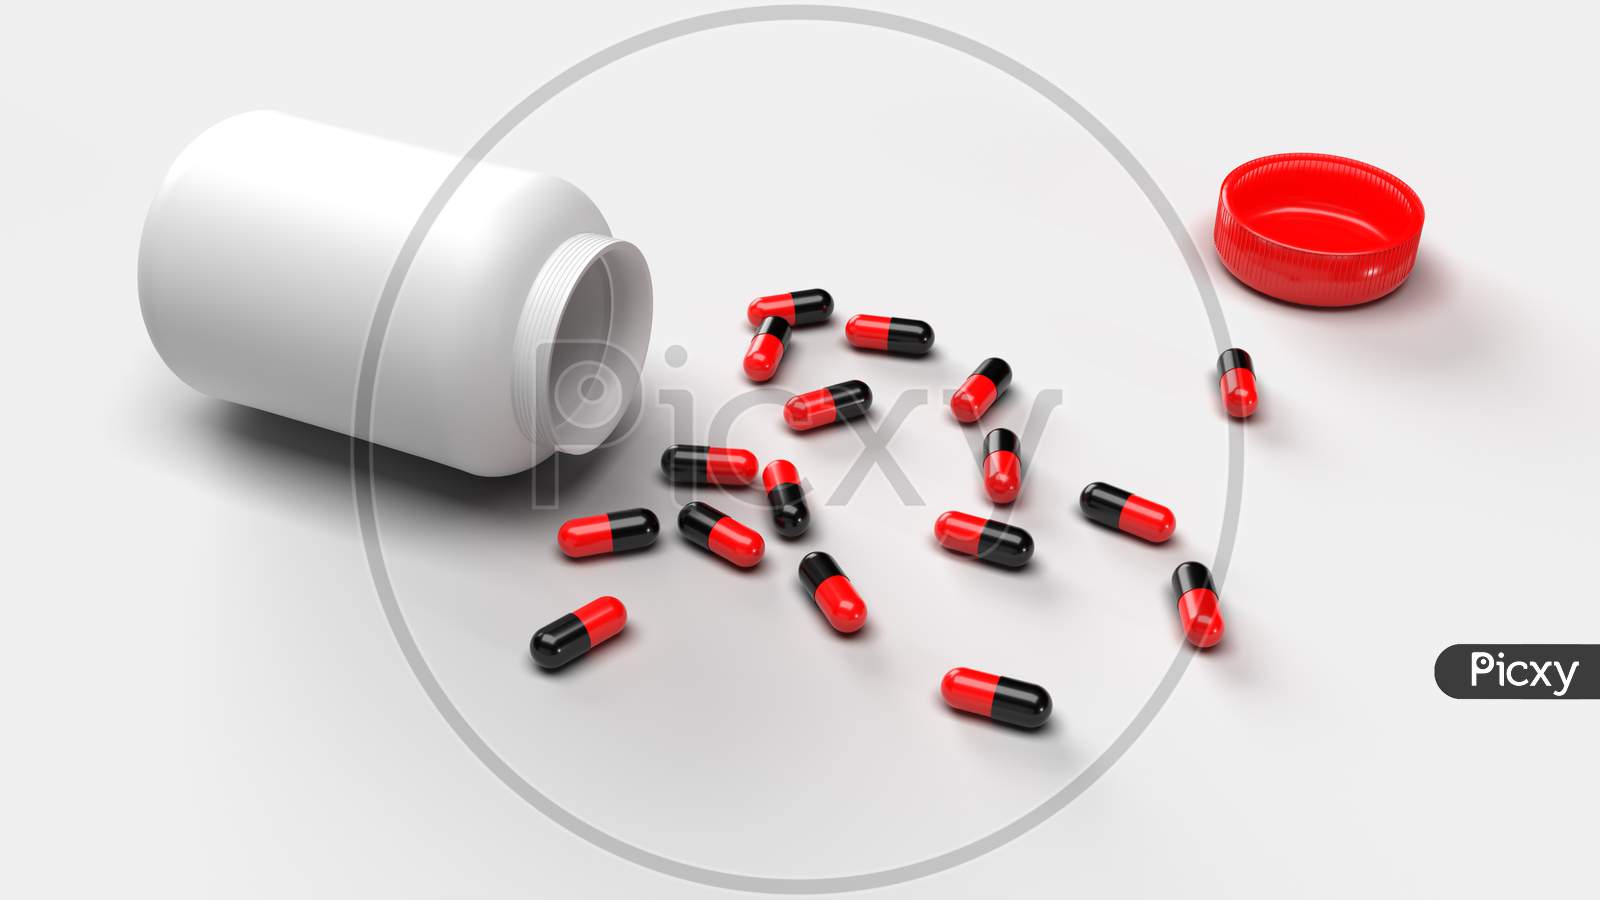 Group Of Pills Medicine Spill From Bottle On White Background. Medical Research And Pharmacy Concept. Drug Addiction. Health Care Prescription Treatment. Supple Food Vitamin. 3D Illustration Render